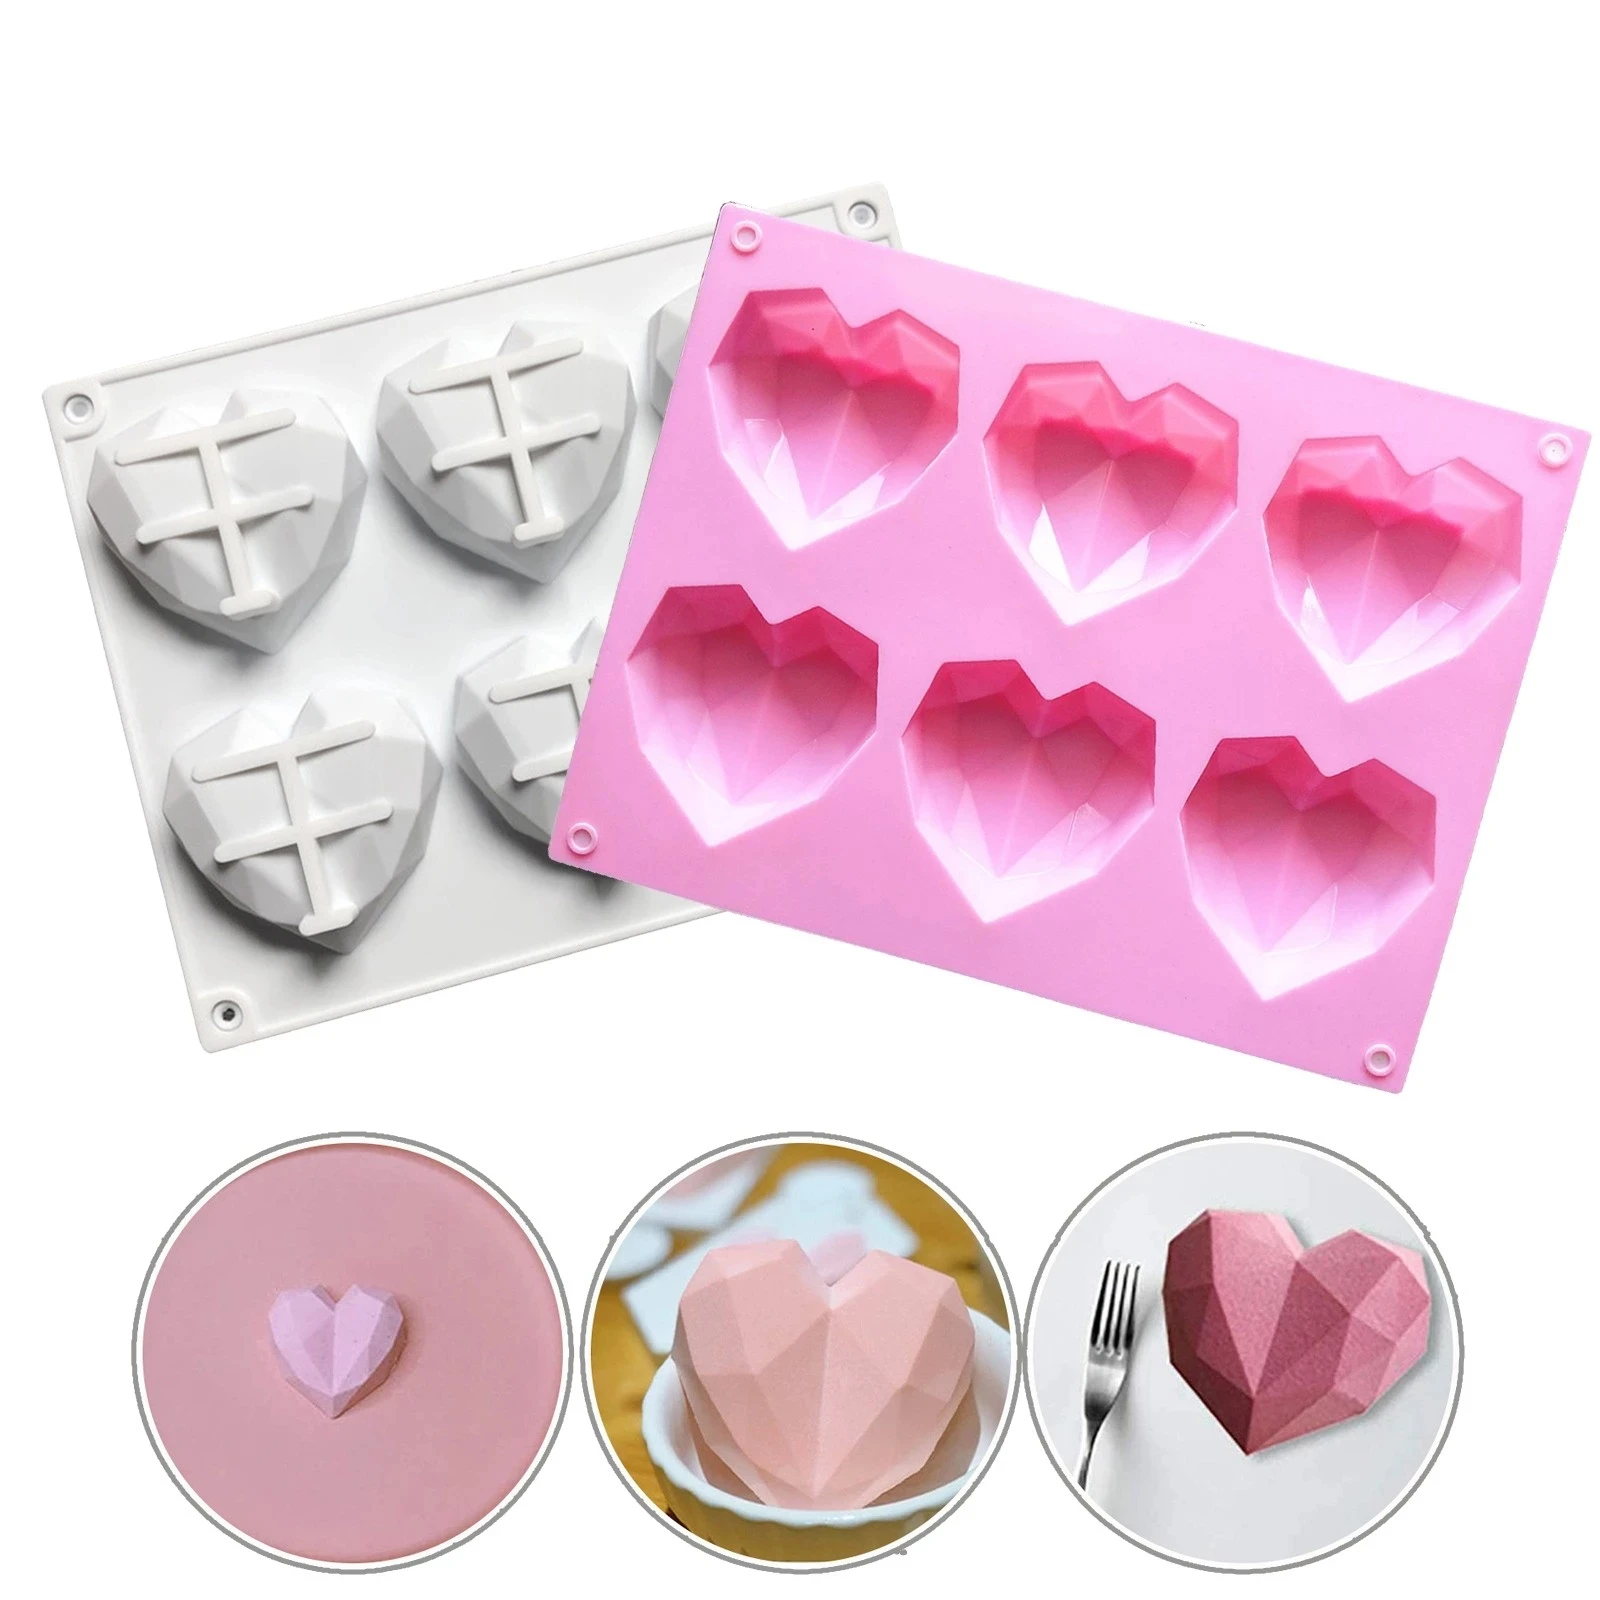 

Heart Round Flower Shape Lollipop Moulds Bakeware 3D Handmade DIY Sticks Chocolate Cake Decorating Silicone Mold, White,pink